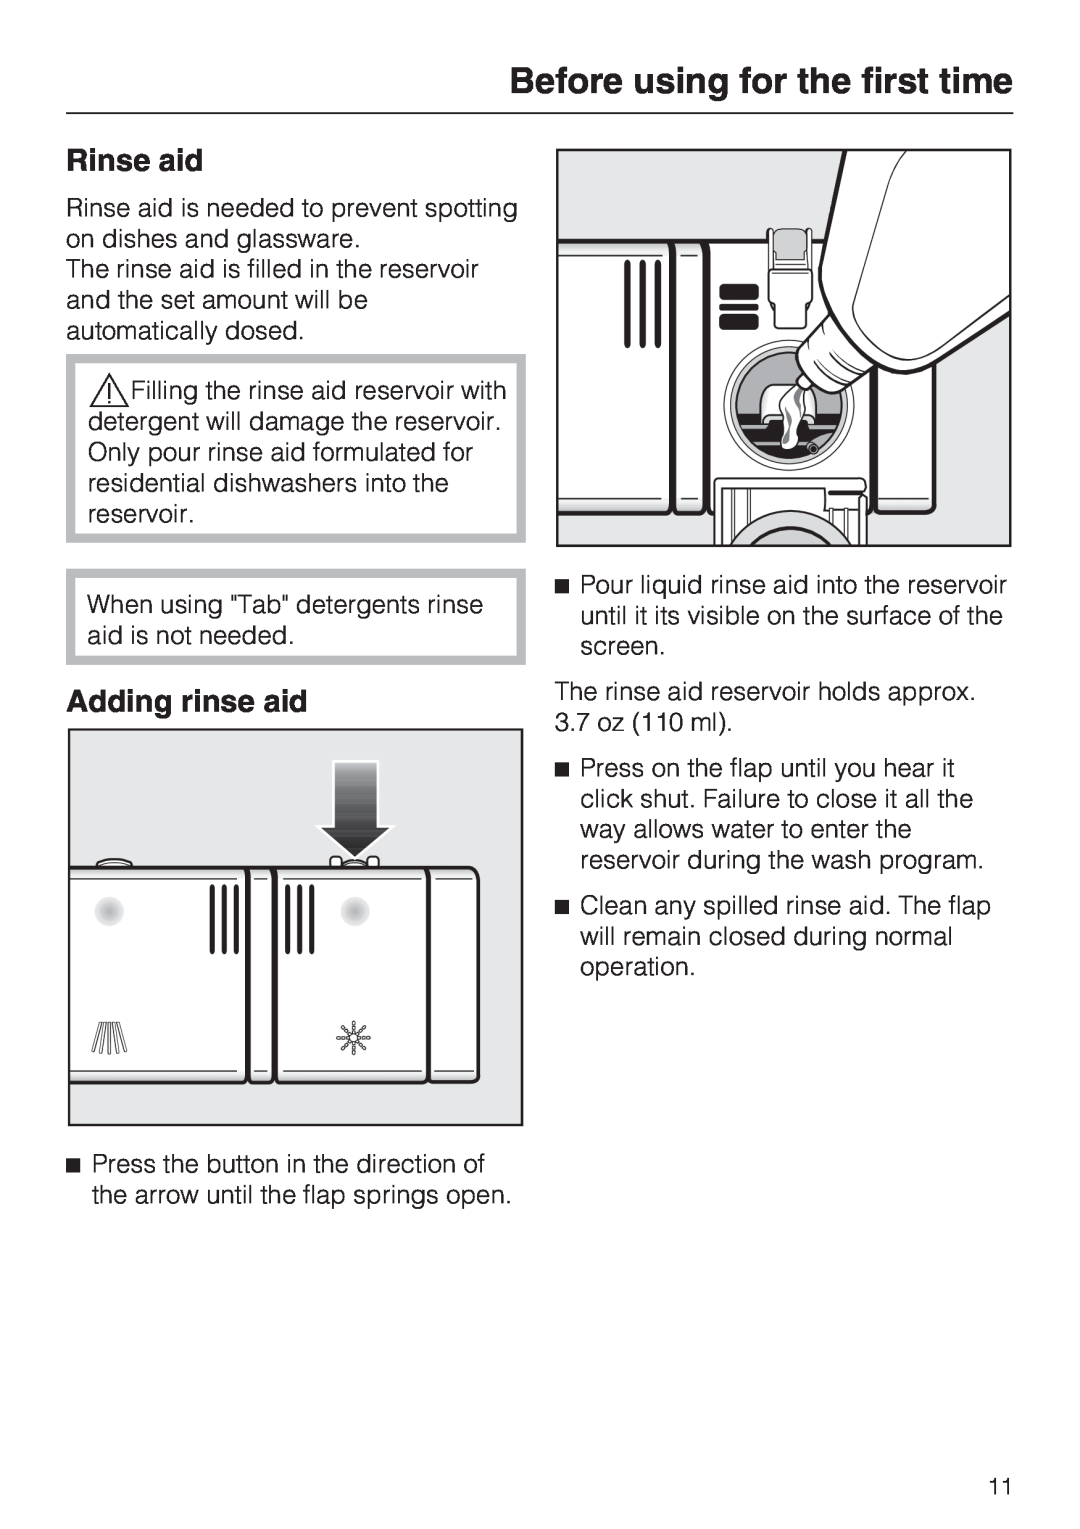 Miele G 4205 operating instructions Rinse aid, Adding rinse aid, Before using for the first time 